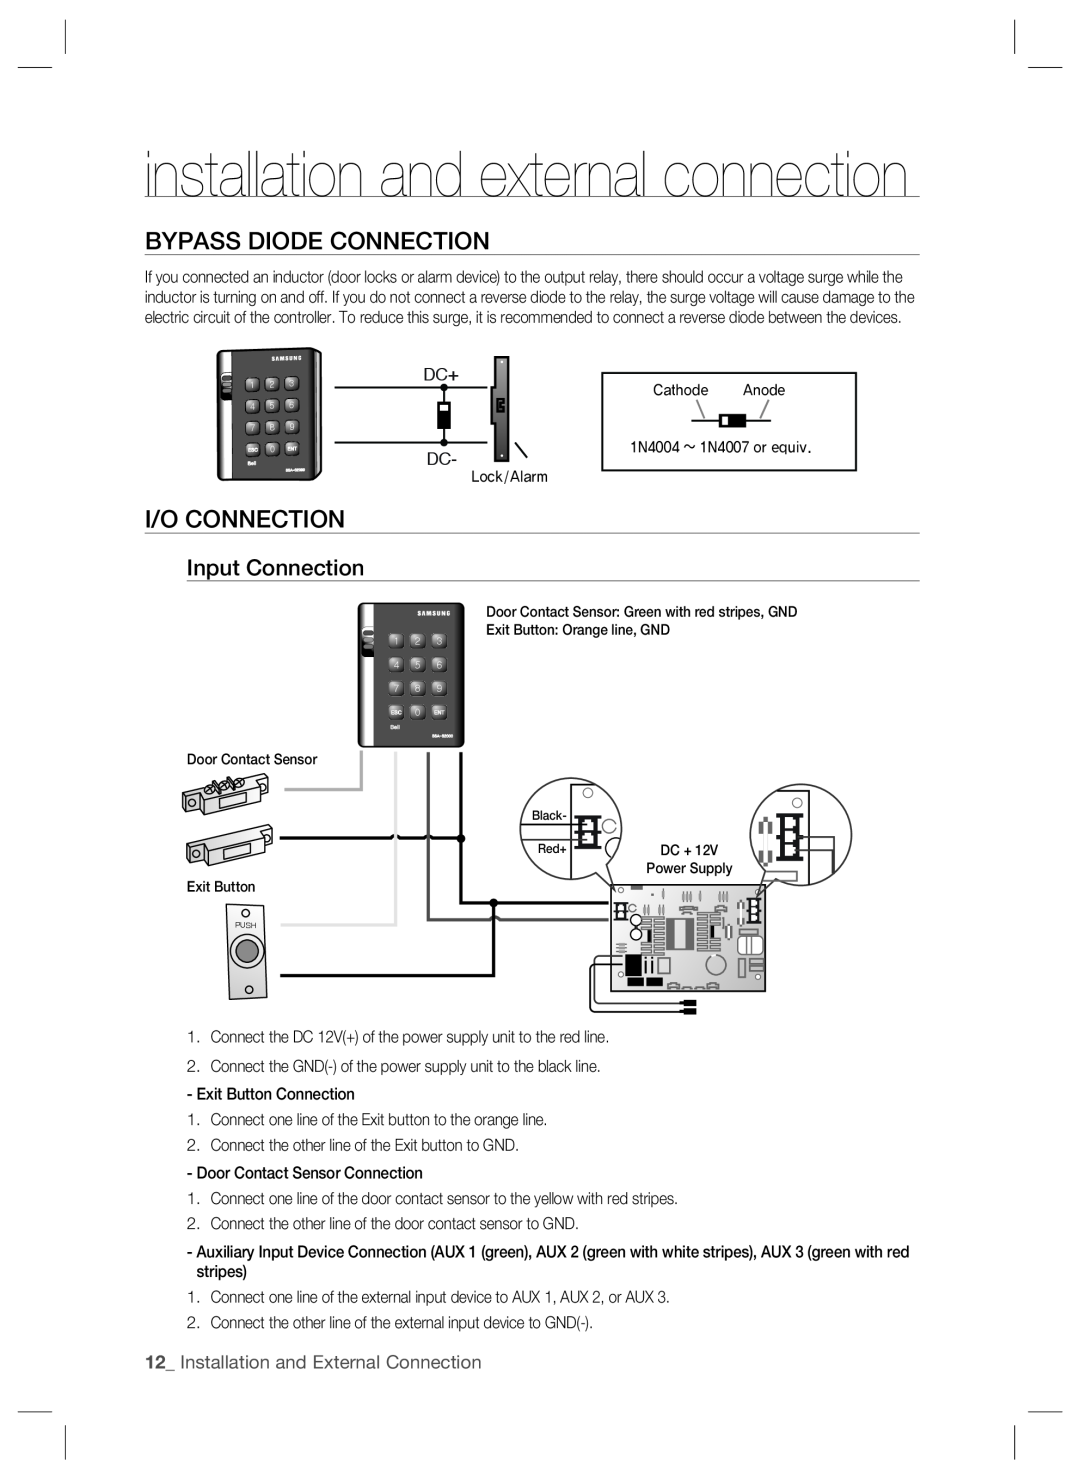 Samsung SSA-S2000W installation and external connection, Bypass Diode Connection, I/O Connection, Input Connection 